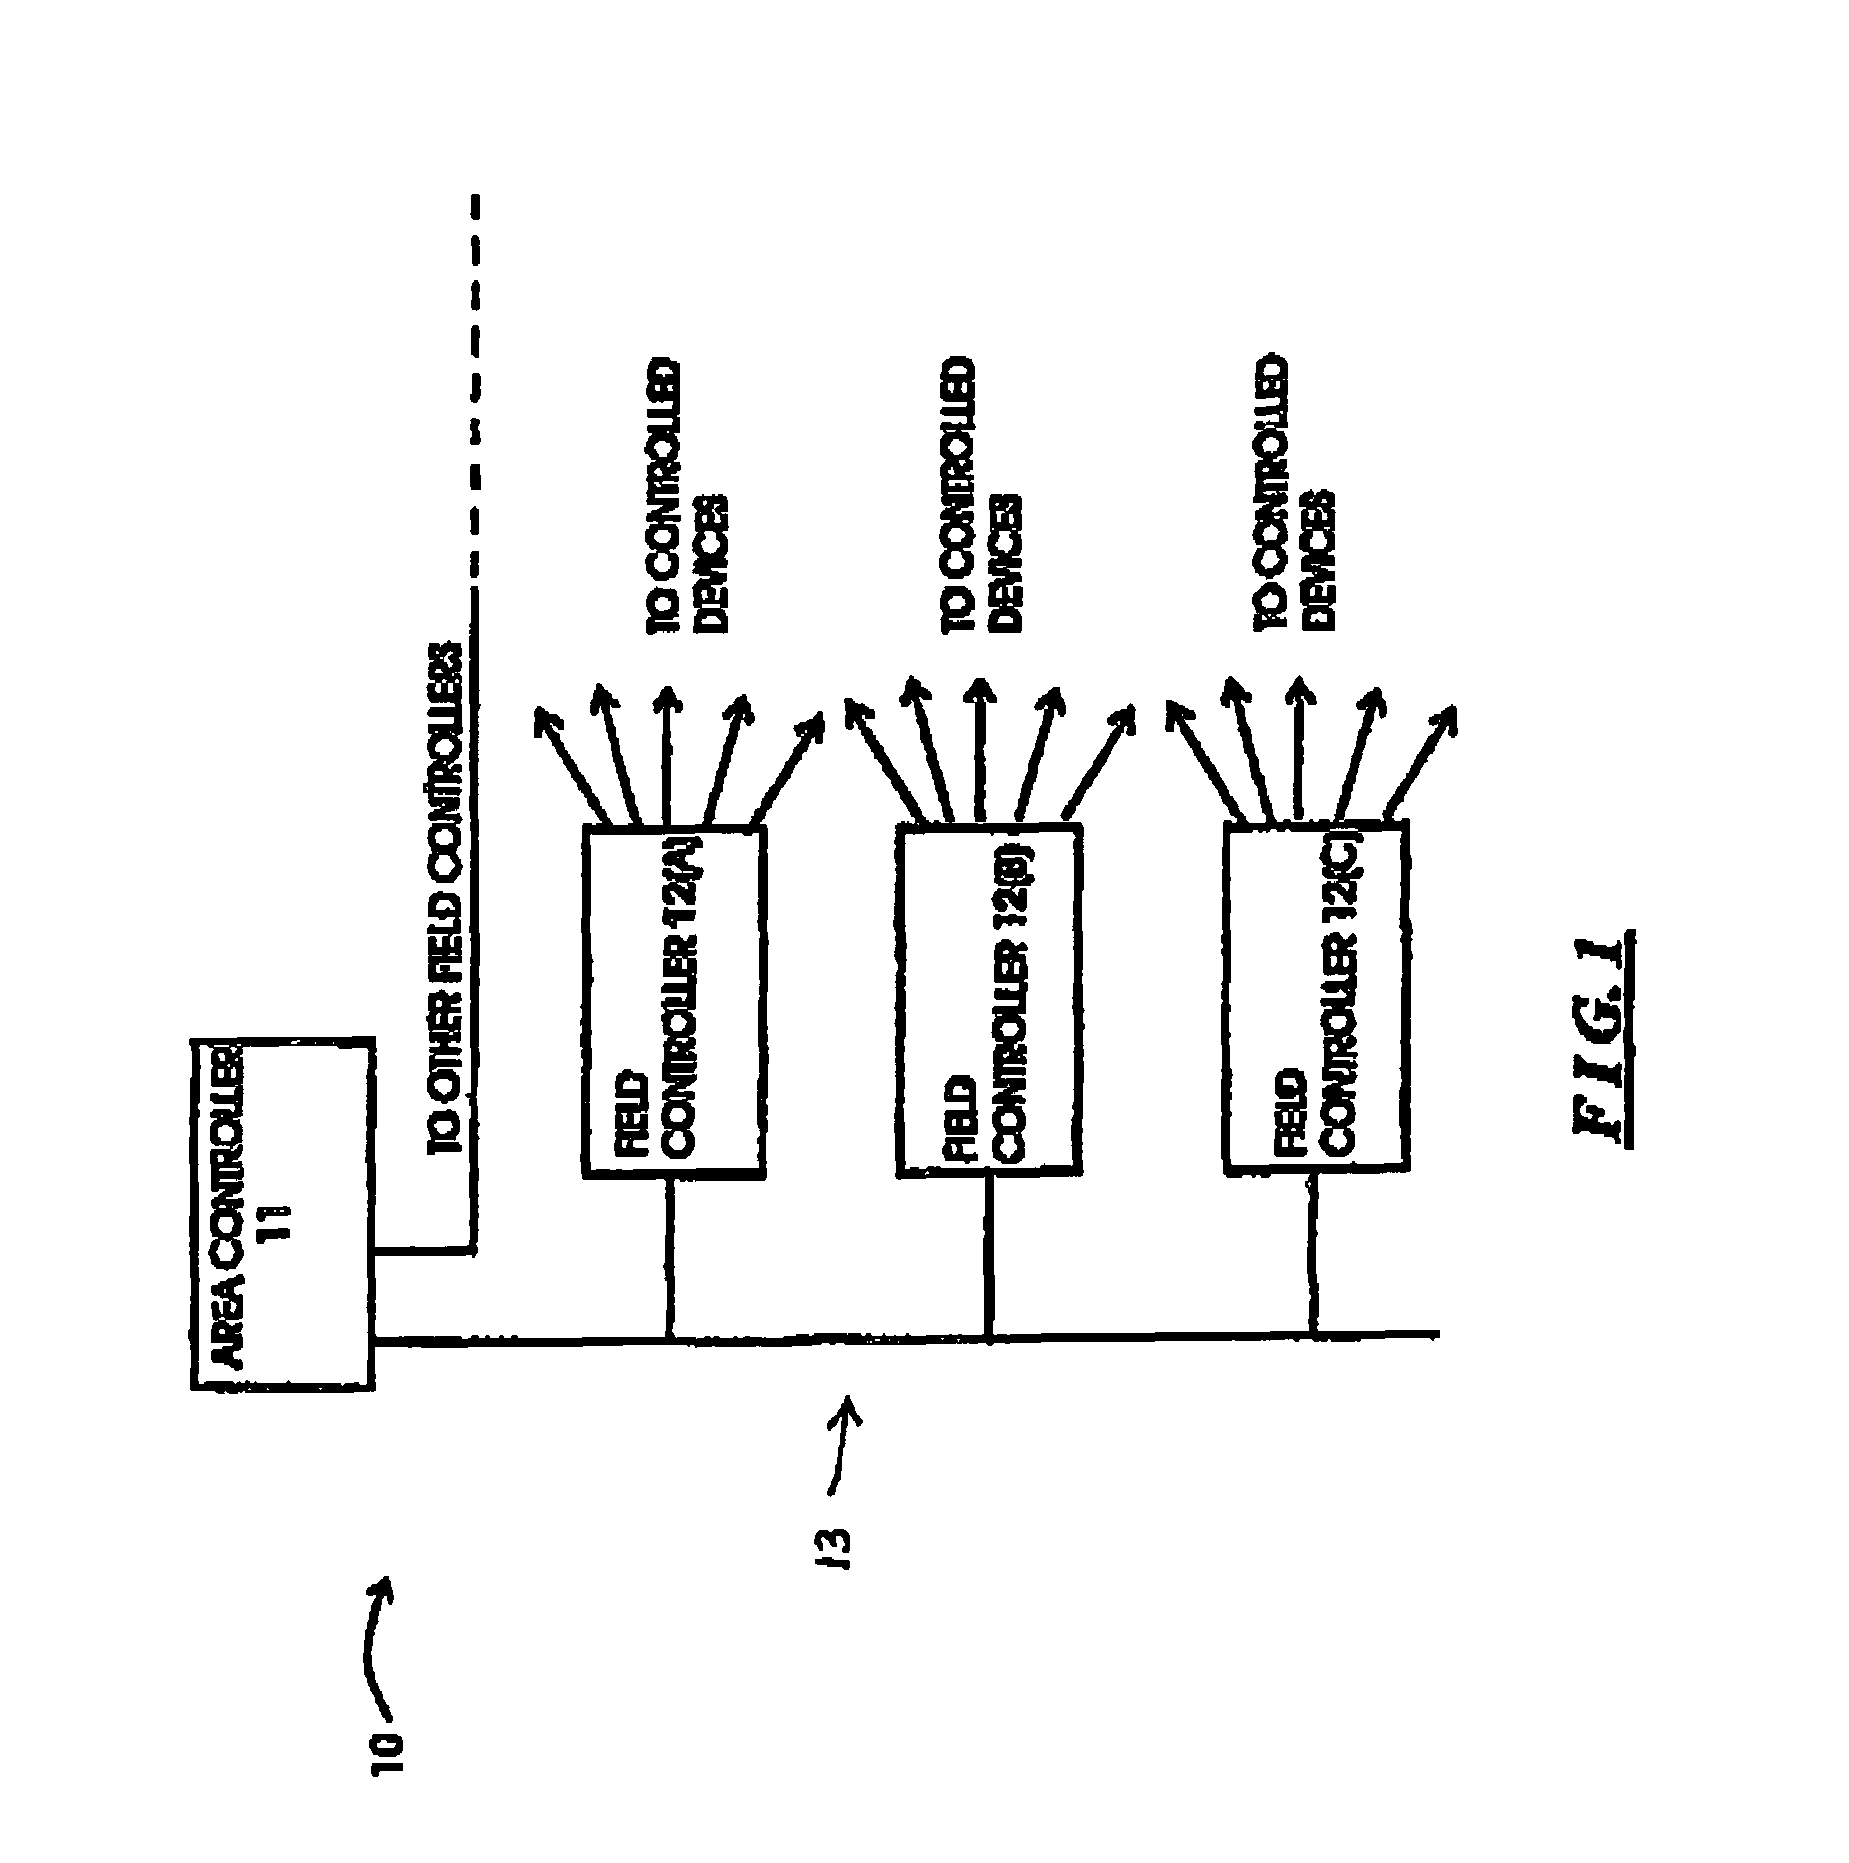 Distributed control system with multiple control levels and/or downloading